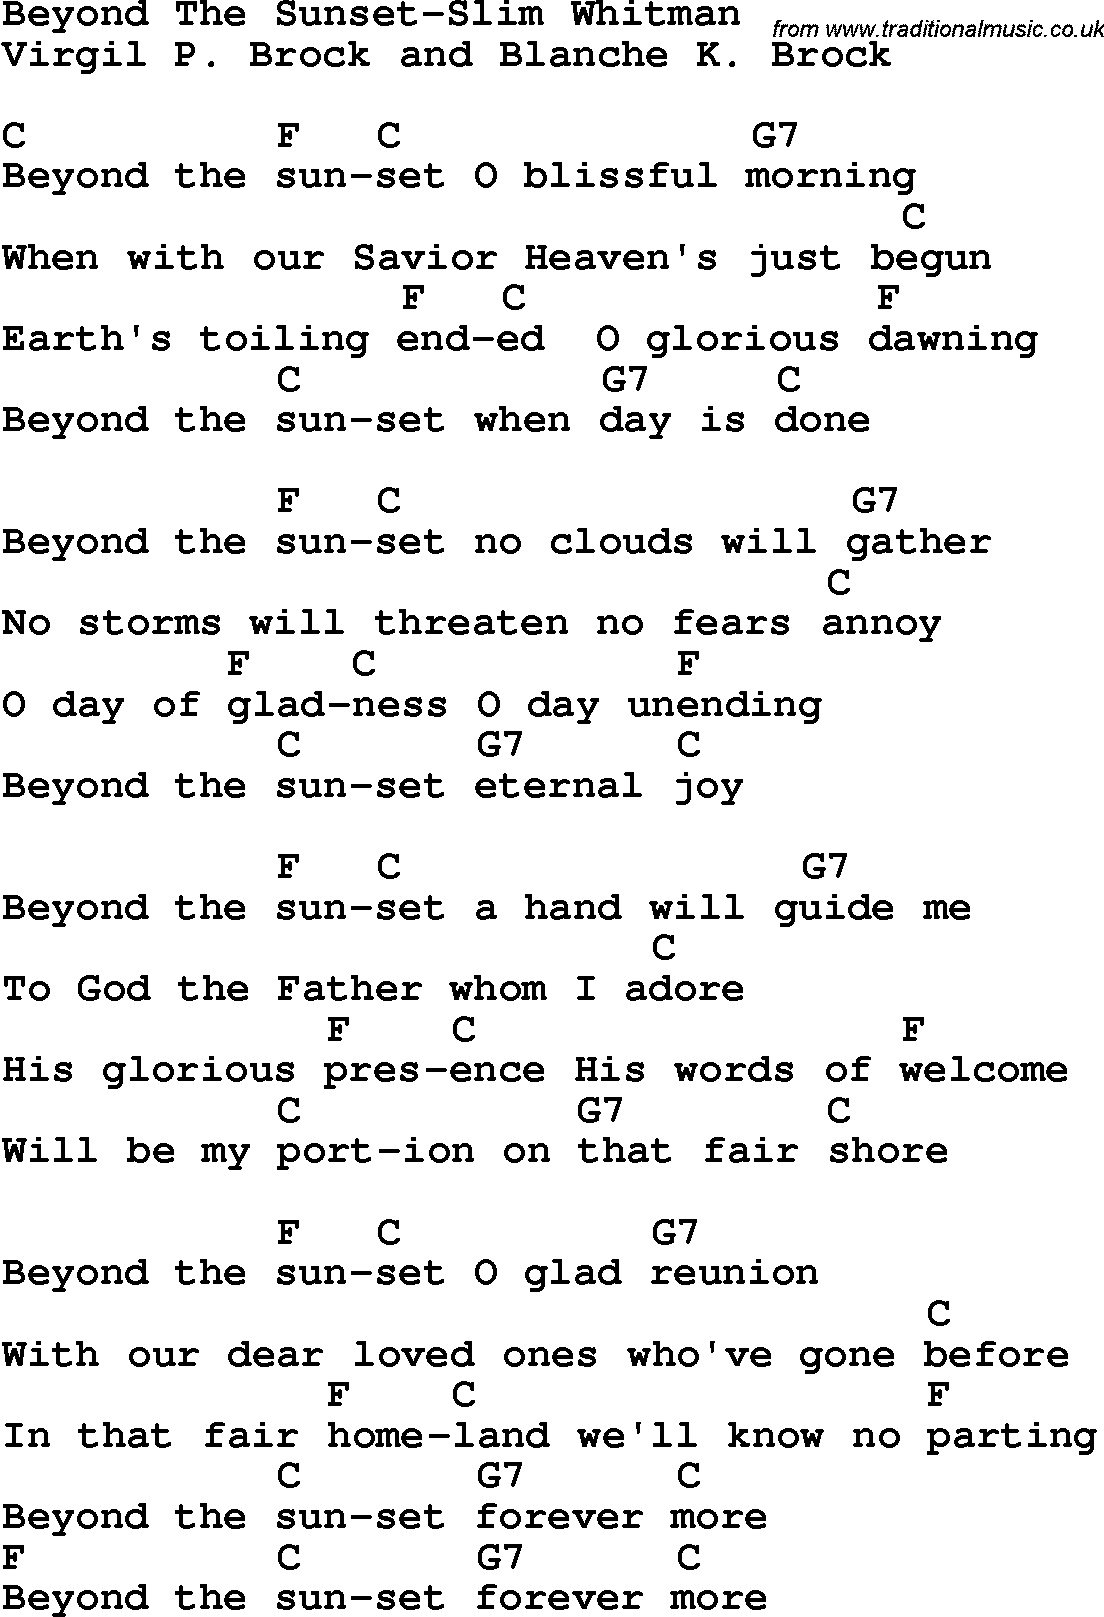 Country, Southern and Bluegrass Gospel Song Beyond The Sunset-Slim Whitman lyrics and chords